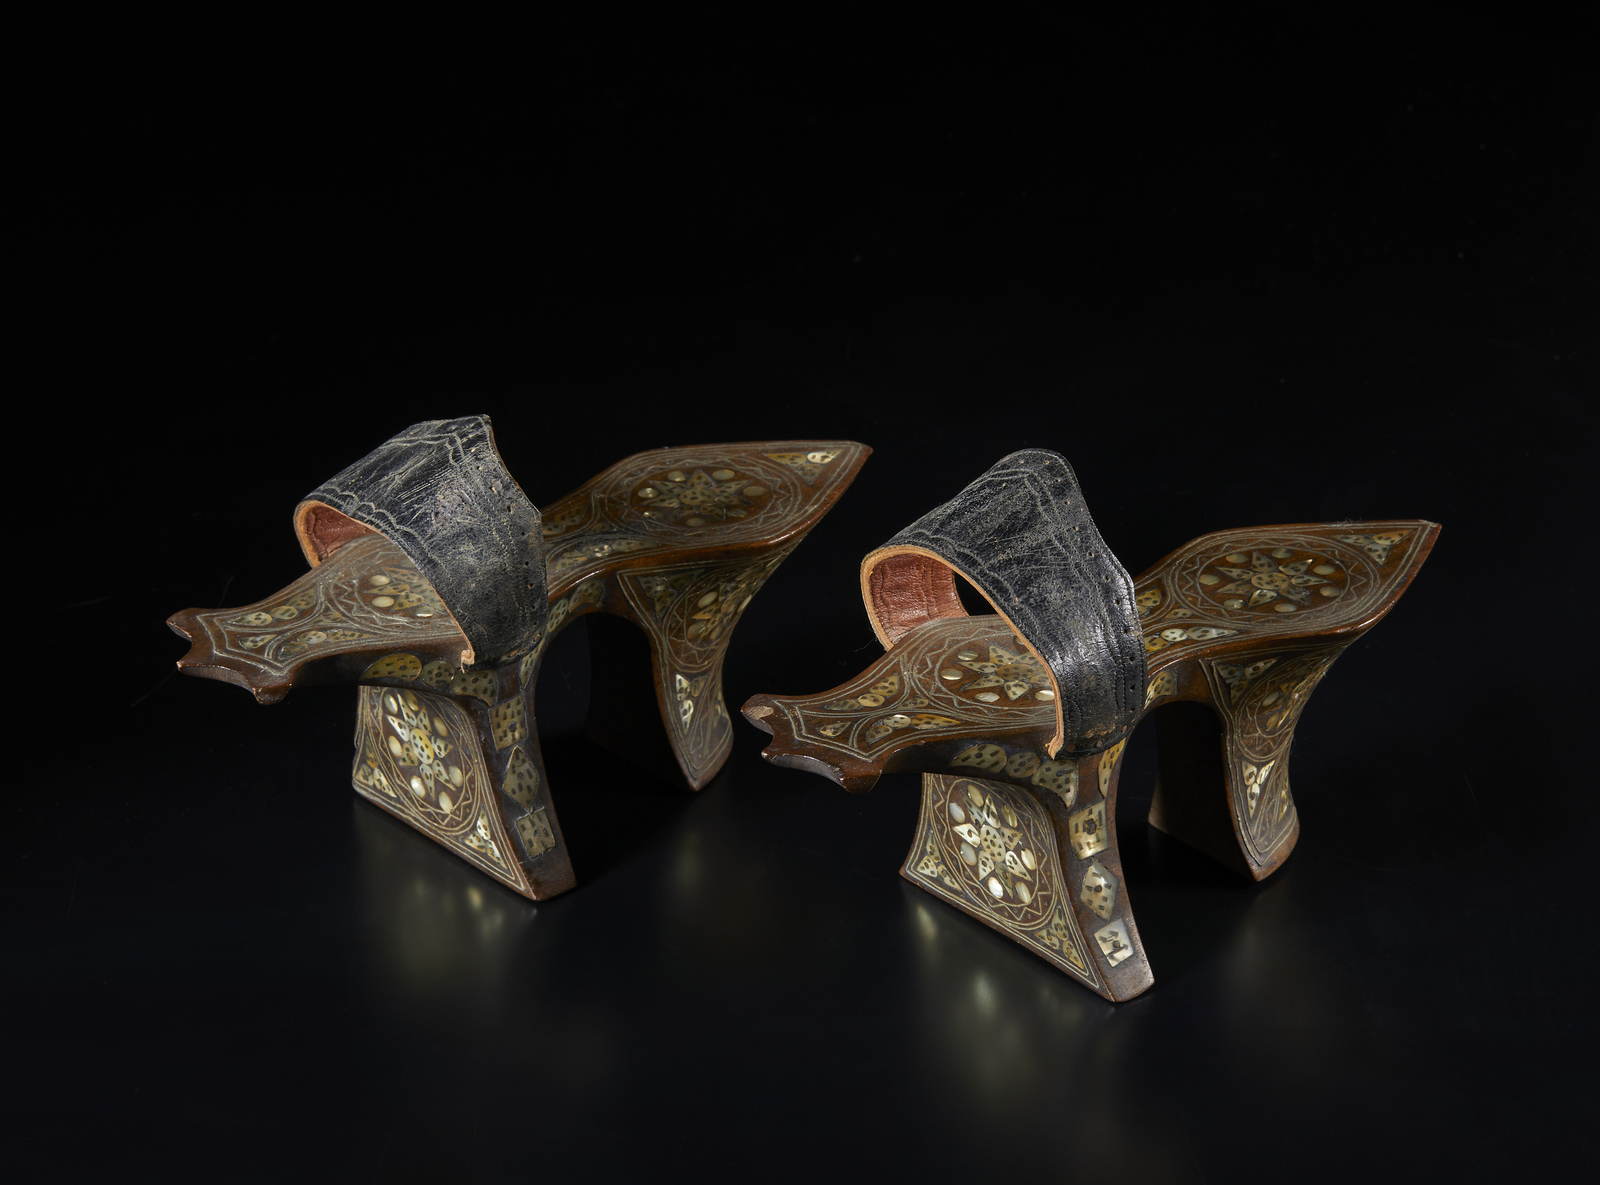 Arte Islamica A pair of mother-of-pearl inlaid wooden hammam clogs Ottoman Turkey, 19th century .